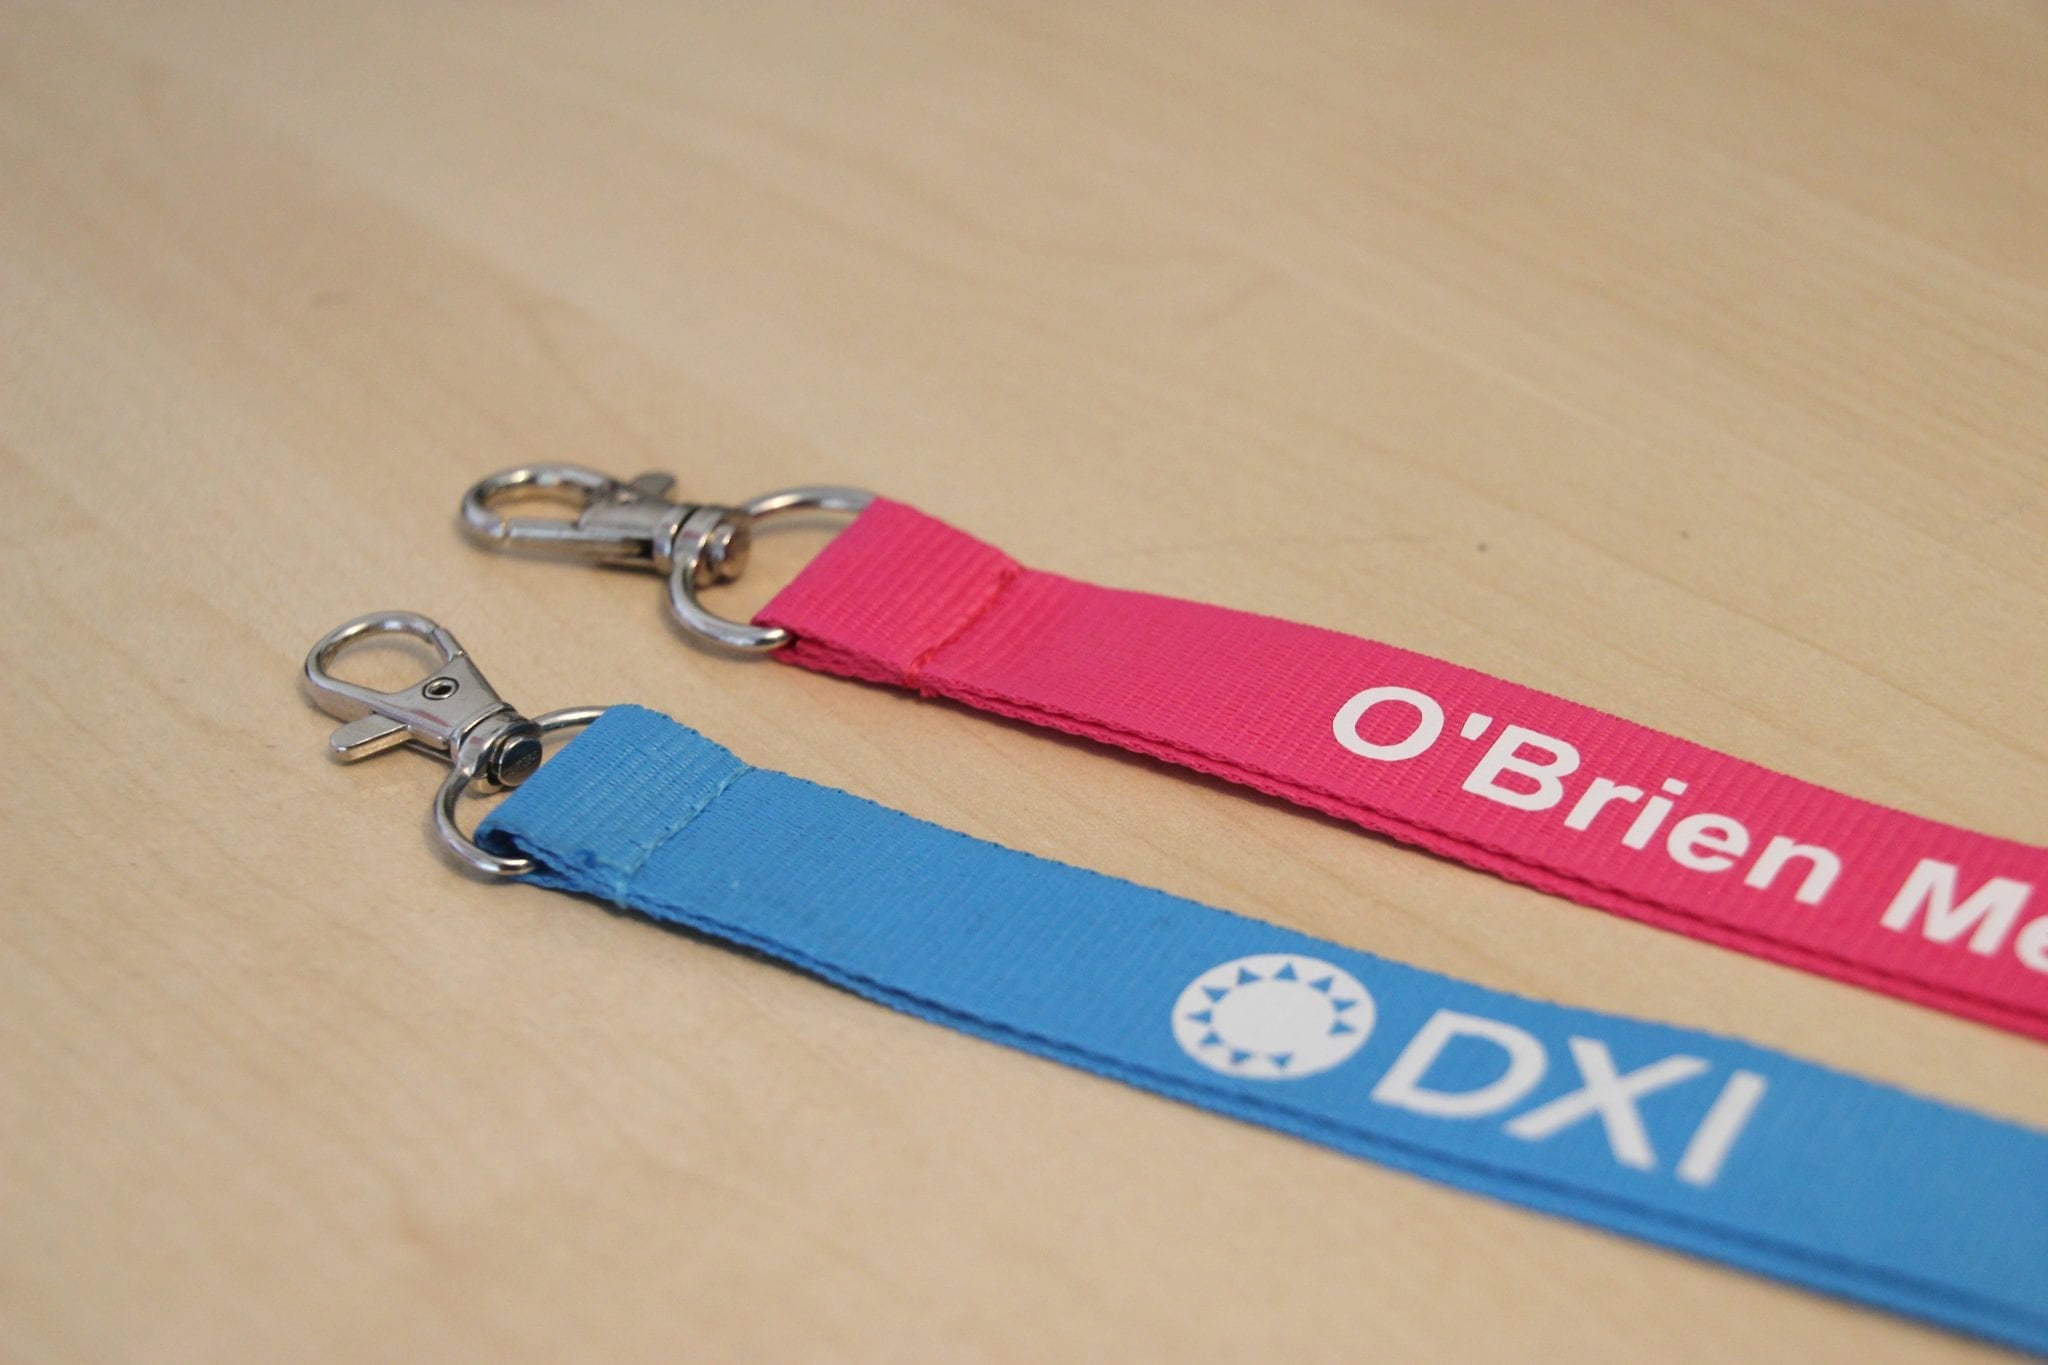 get-noticed-with-personalised-lanyards-photo-id-cards.png